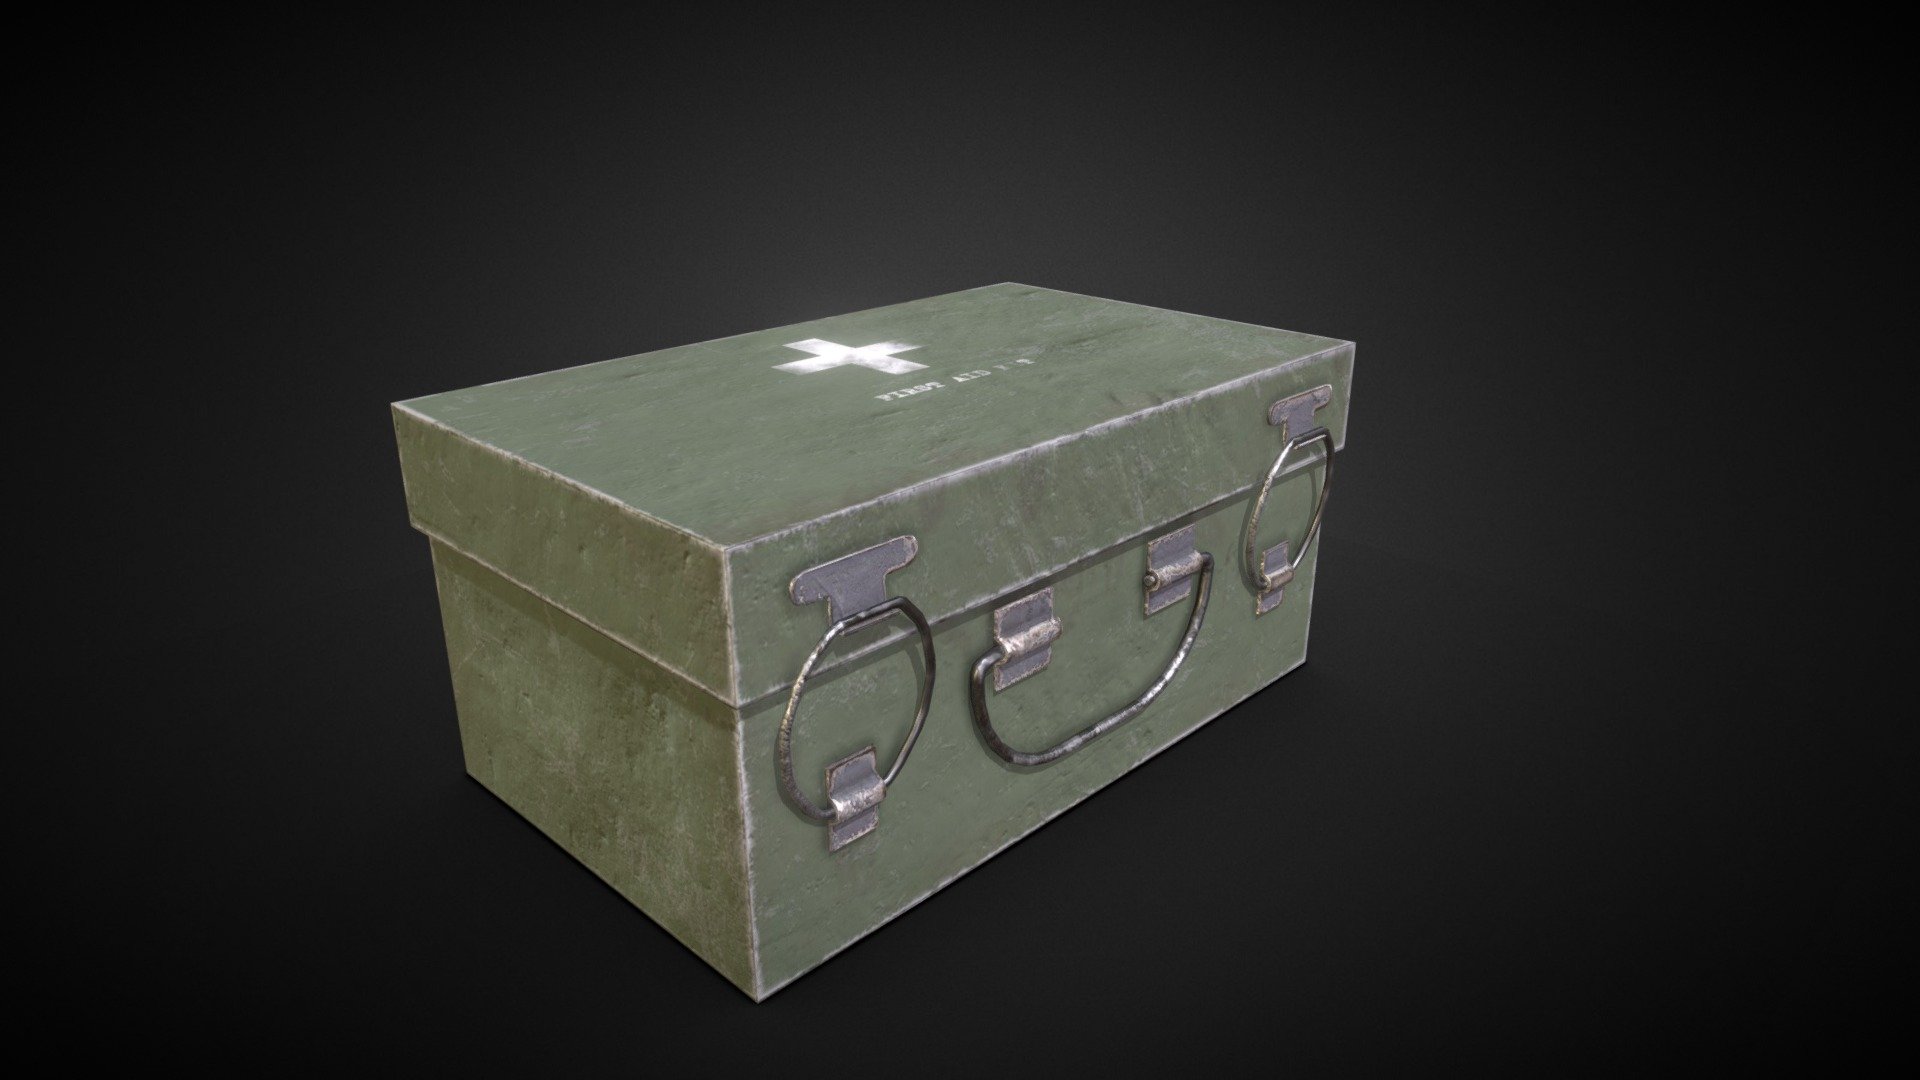 old military first aid kit

All textures are made in substance paynter Textures are applied to the body Unwrap. All deployed National Objects
Texture size 2048x2048 - first aid kit - 3D model by mrxai0 3d model